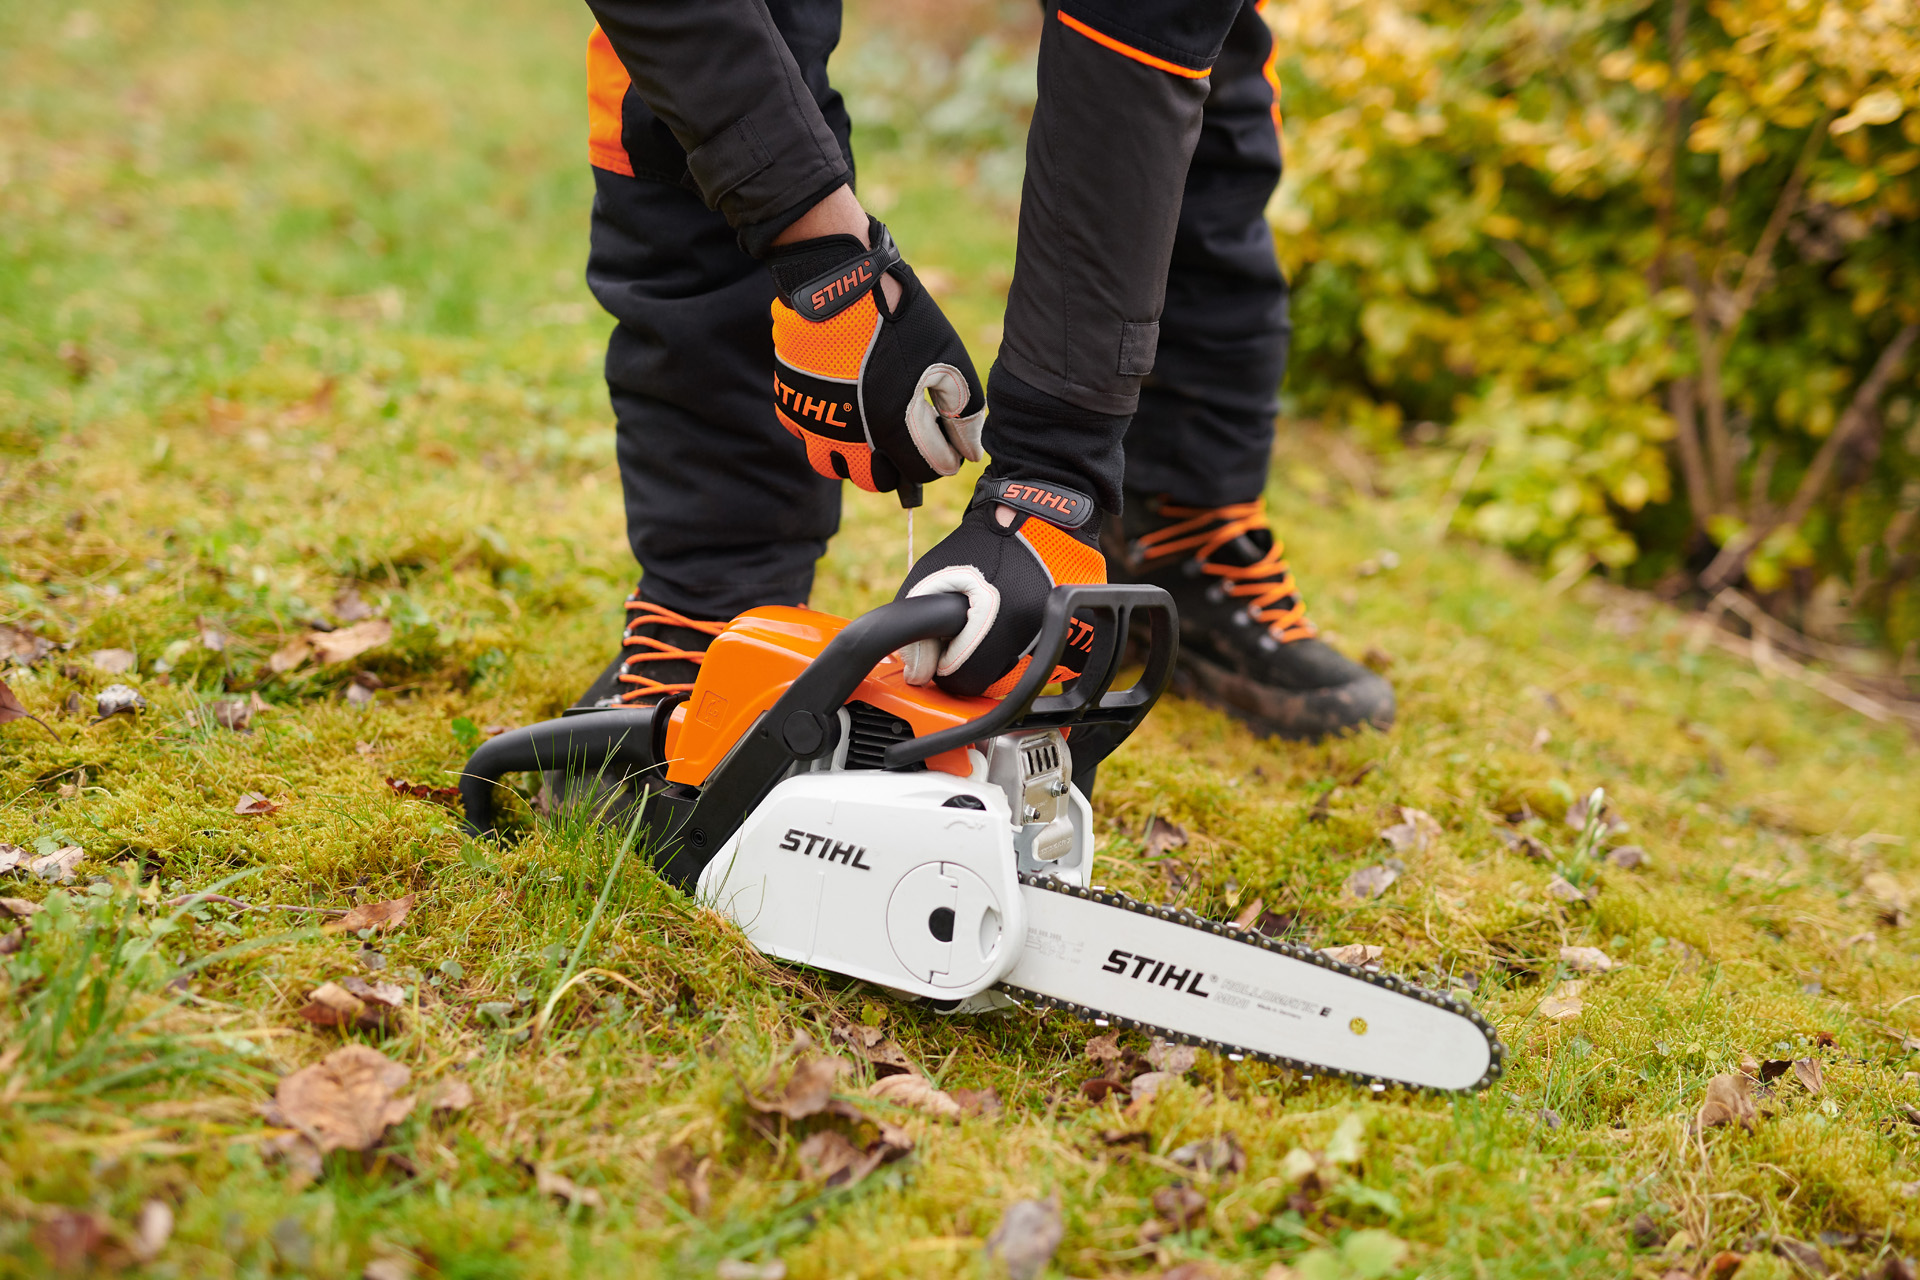 STIHL ignition systems: a powerful start